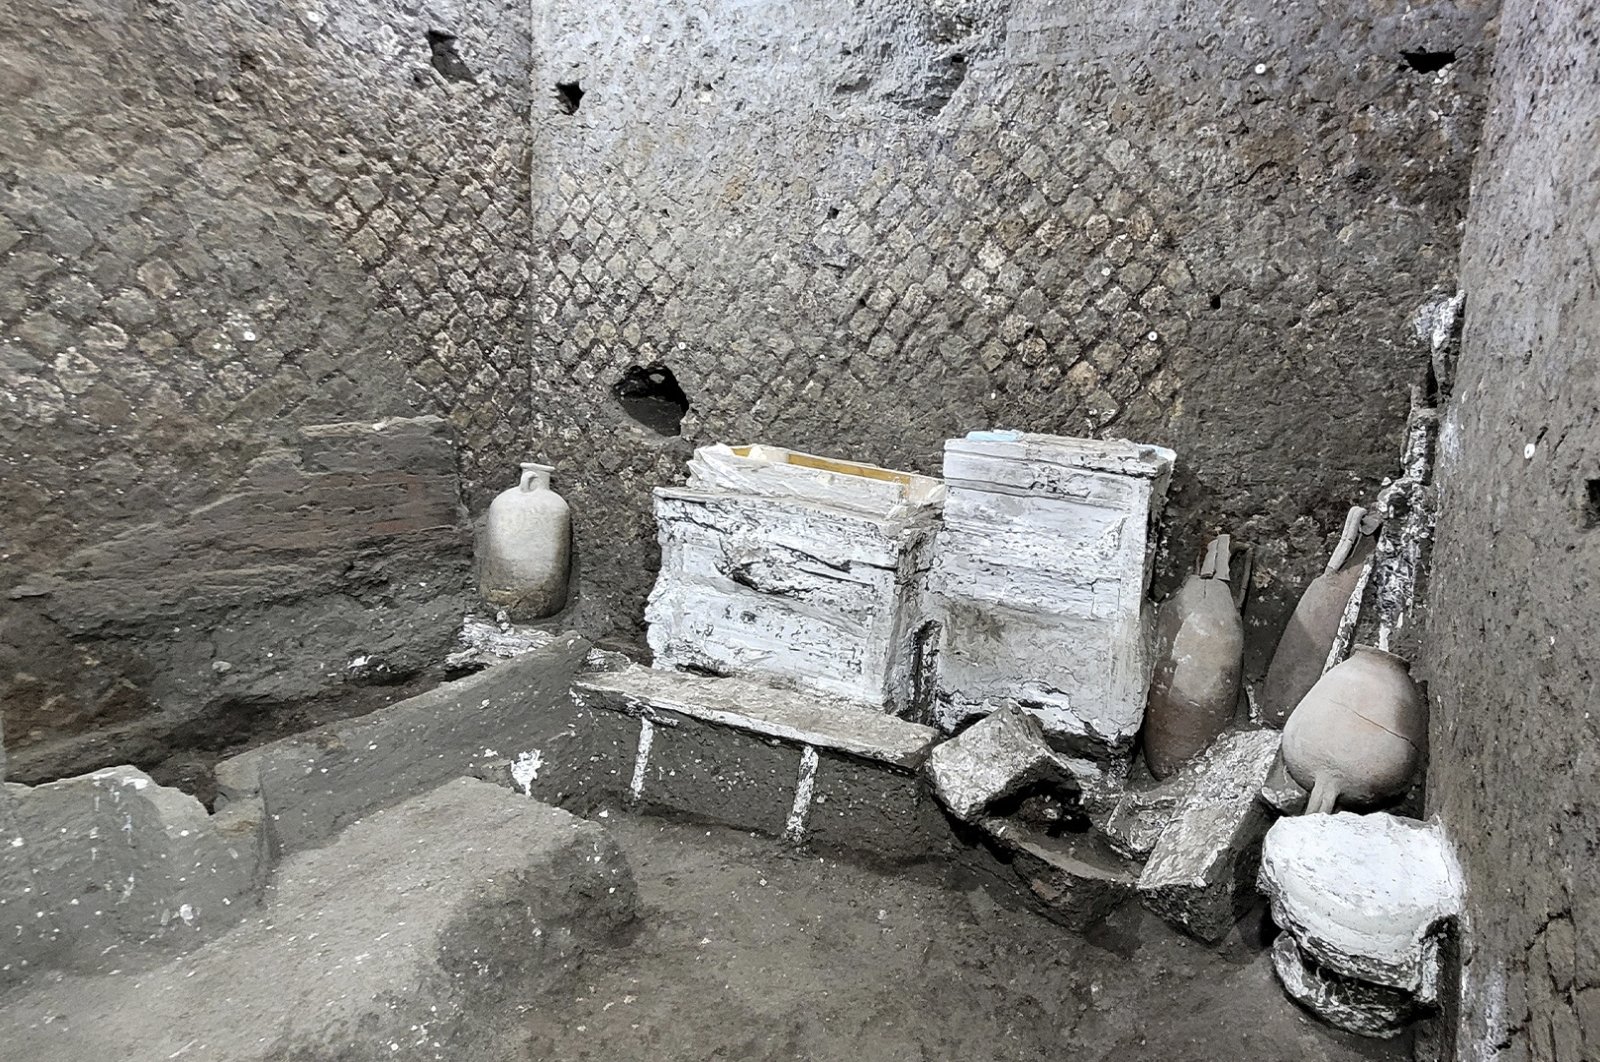 A small bedroom that was almost certainly used by slaves is pictured after it was discovered by archaeologists in a Roman villa near Pompeii, in this undated picture, Italy. (Reuters Photo)